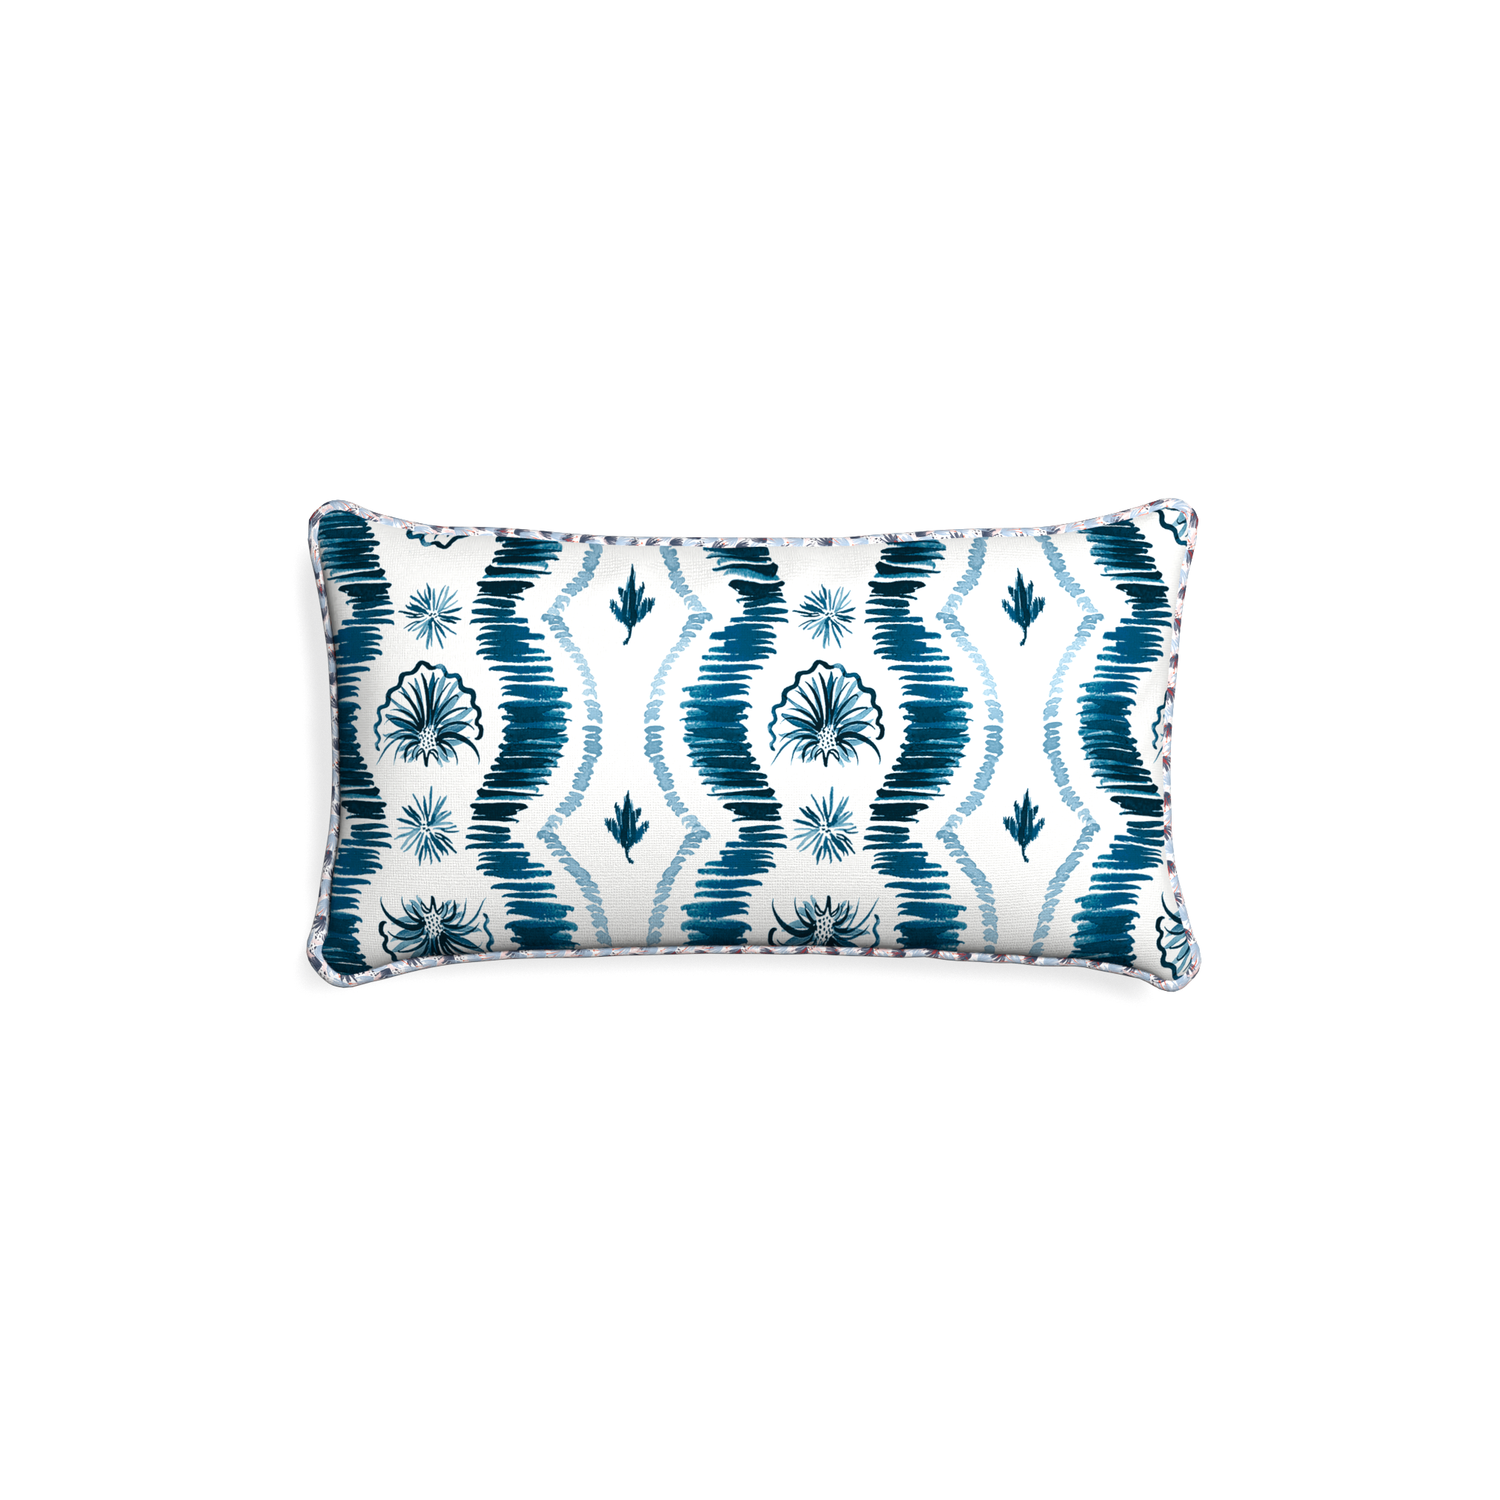 Petite-lumbar alice custom blue ikatpillow with e piping on white background